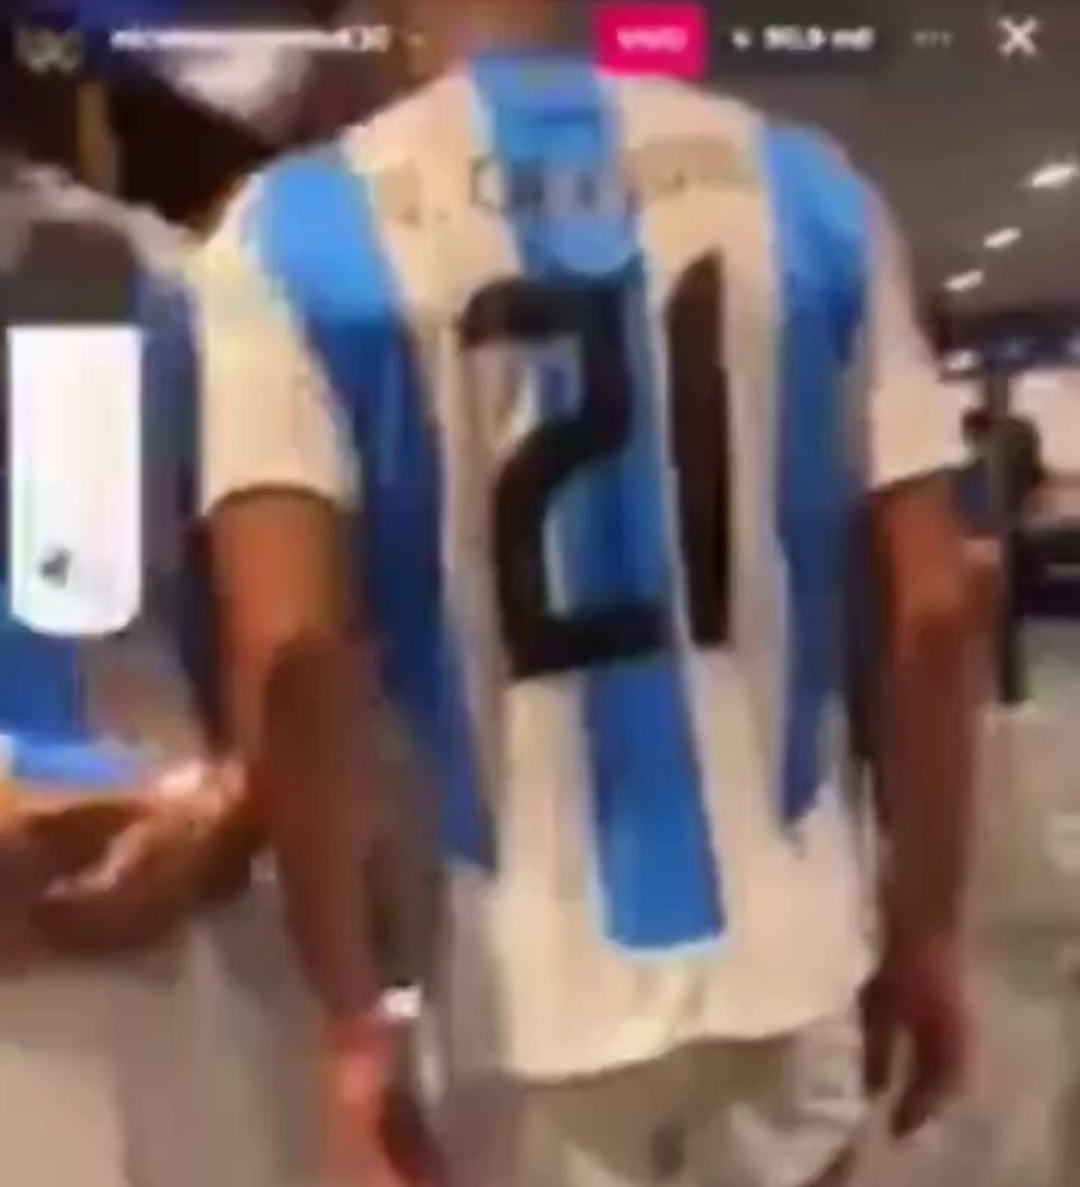 More controversy as another video goes viral of the Argentina players singing a vile song aimed at the Colombian team